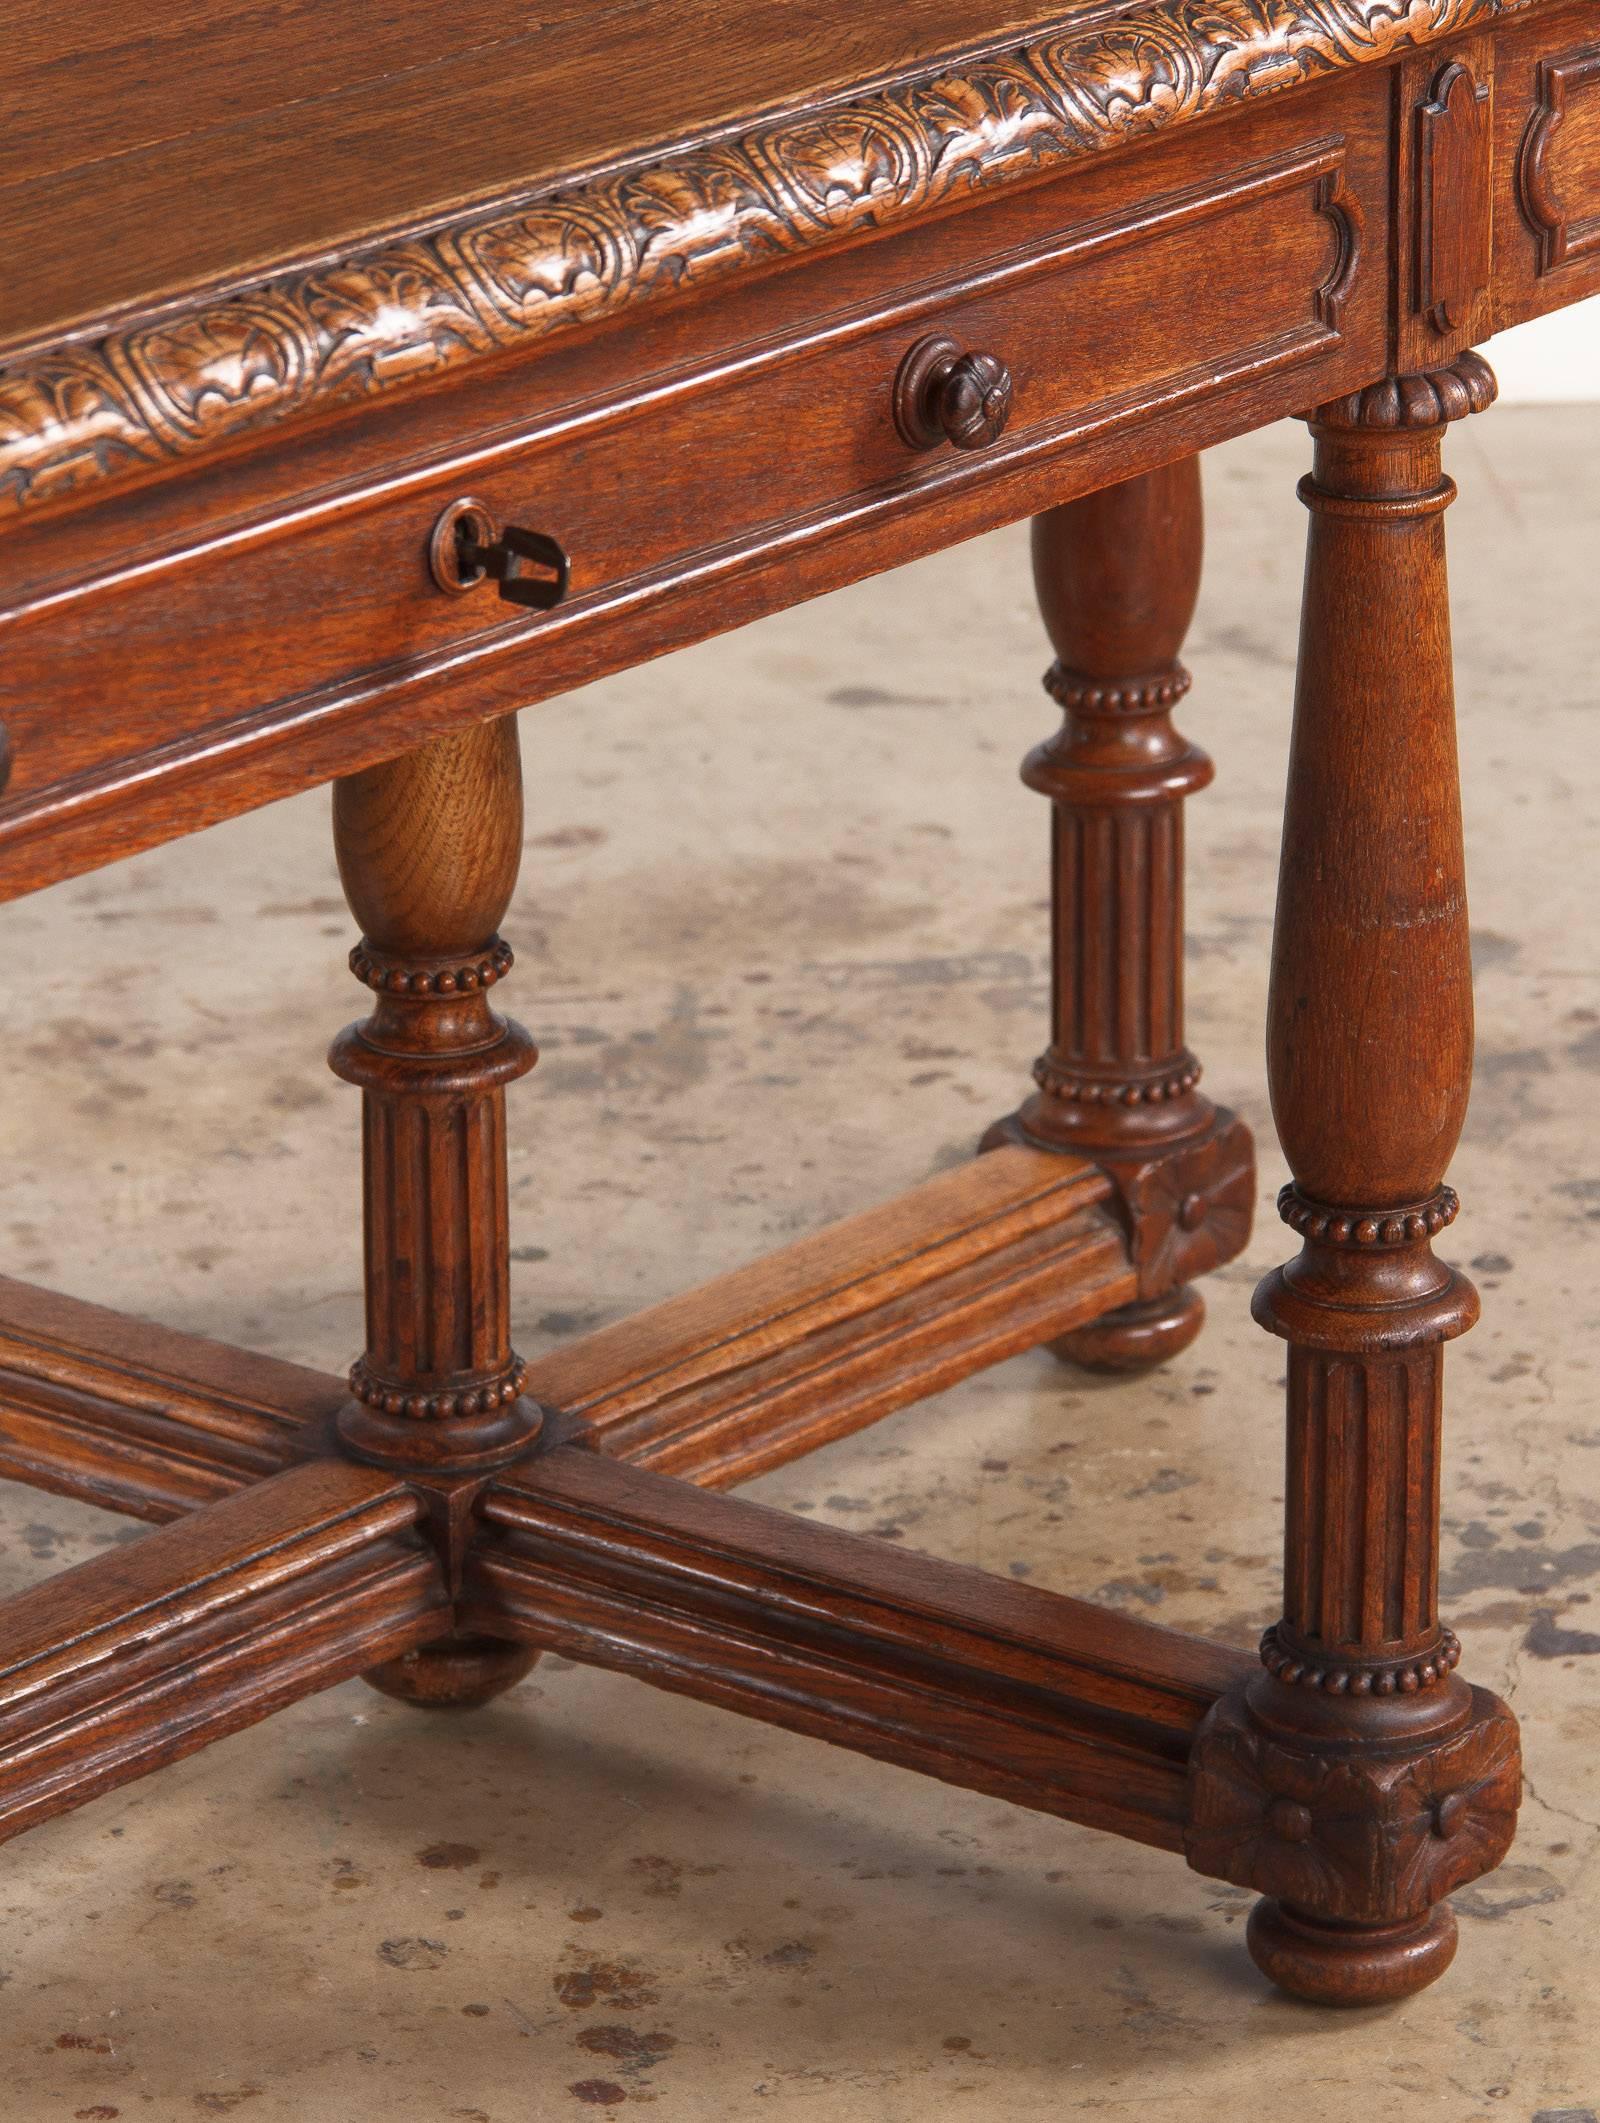 19th Century French Renaissance Revival Style Oak Library Table or Desk, Late 1800s